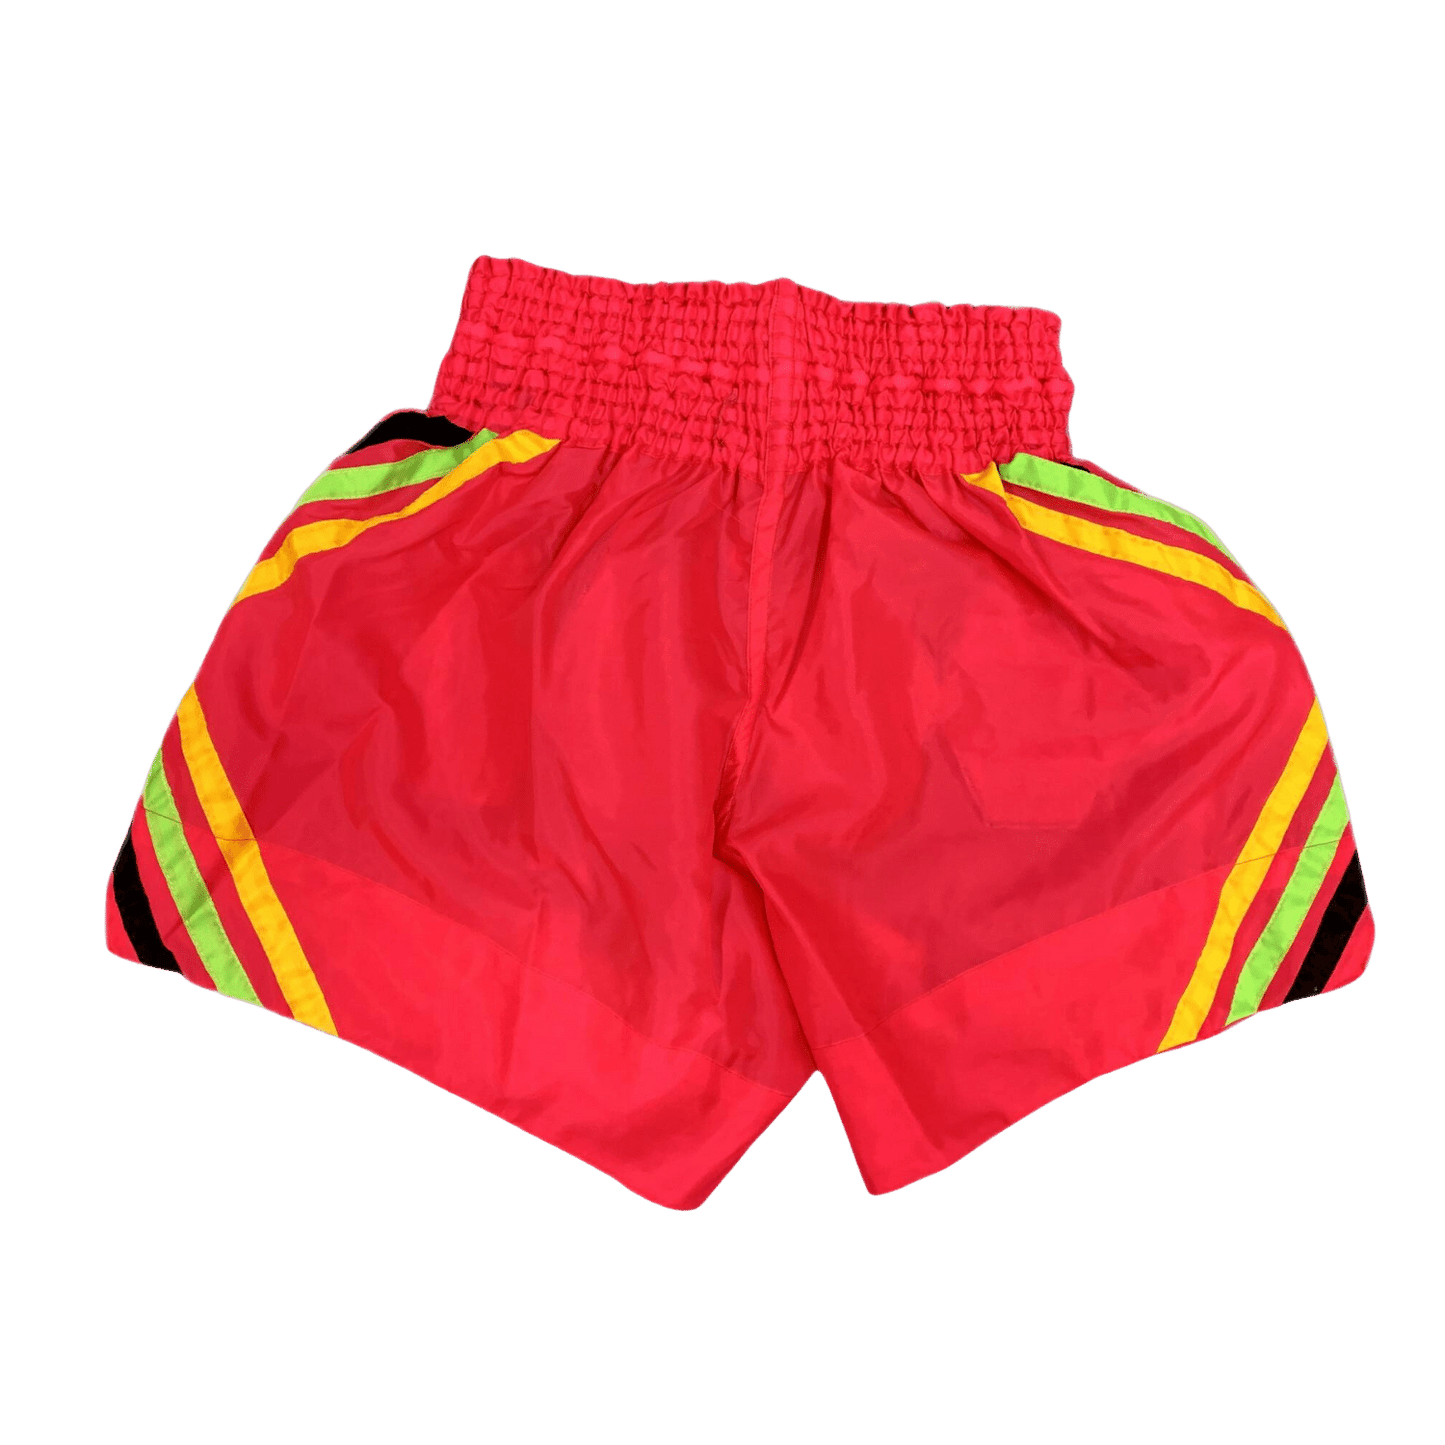 High-quality Lumpini Pink Muay Thai Boxing Shorts in red and yellow by Hanuthai.